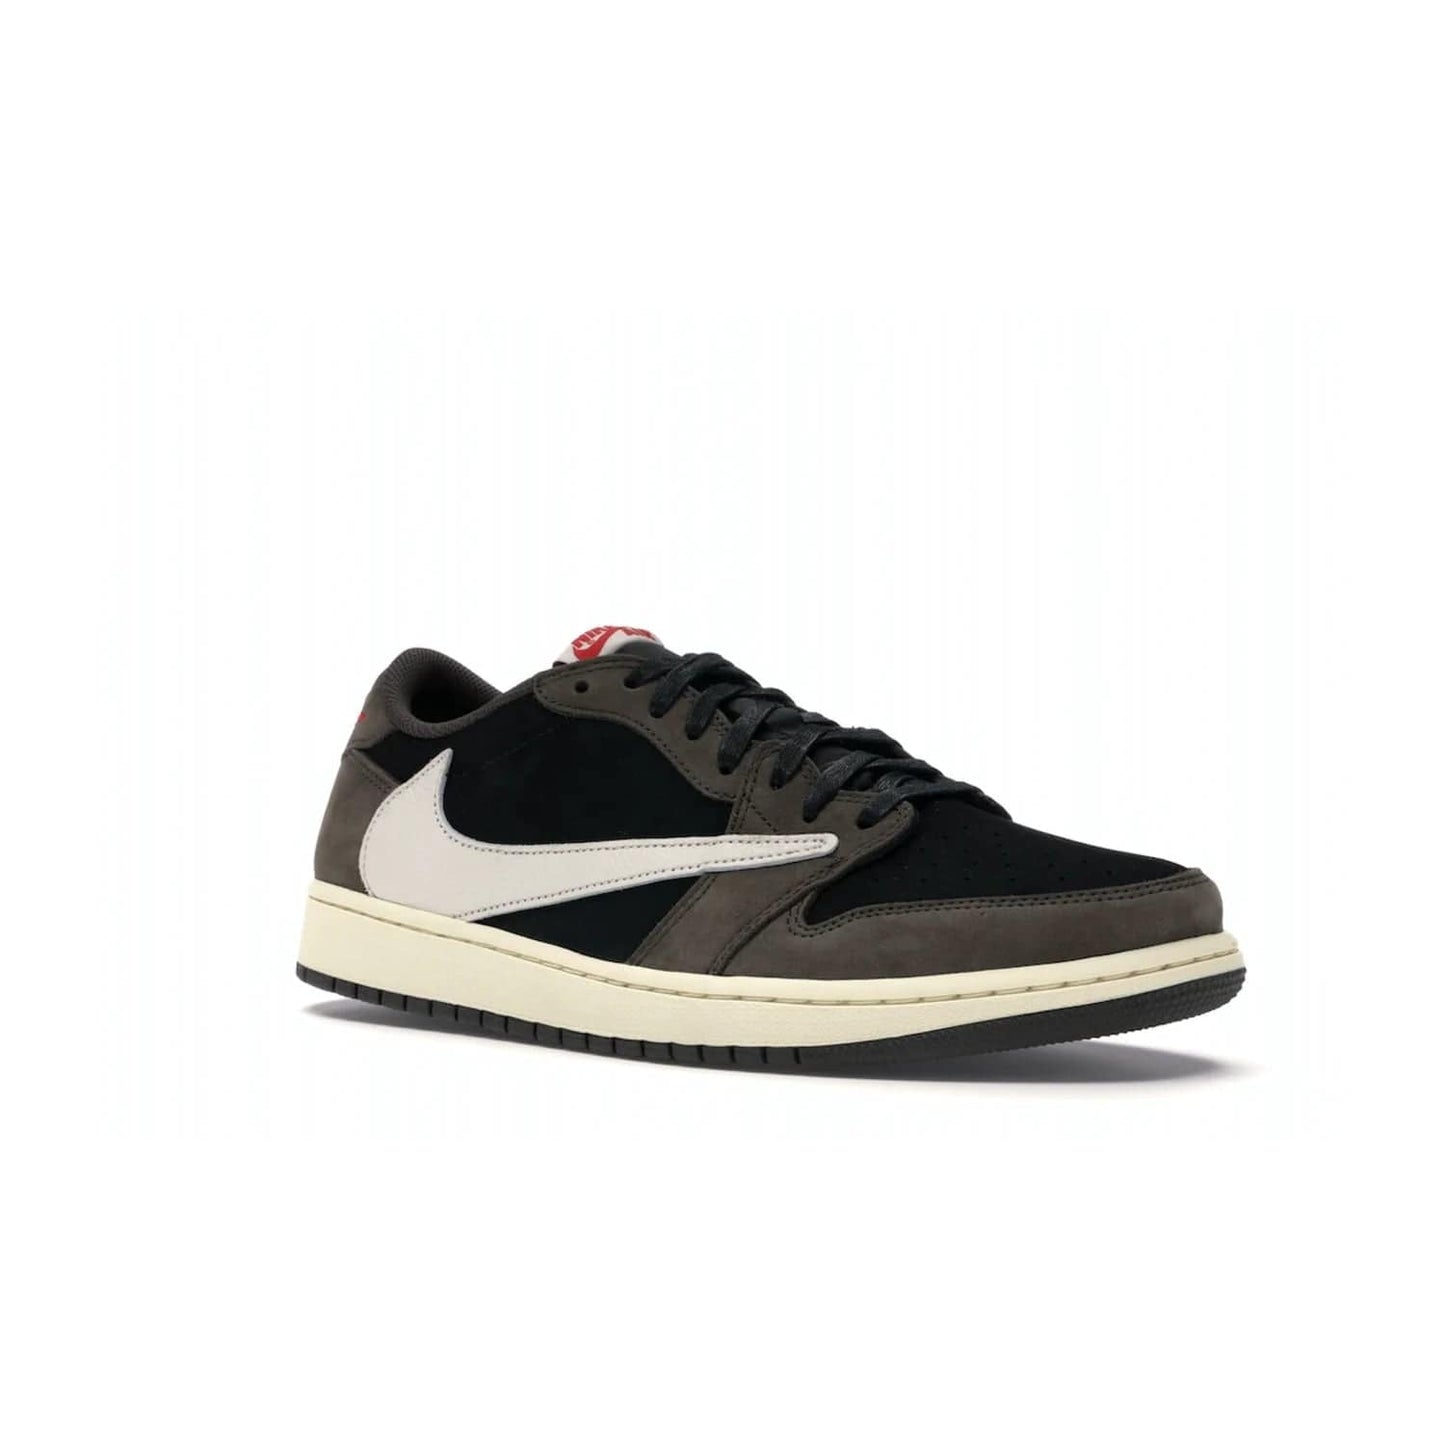 Jordan 1 Retro Low OG SP Travis Scott - Image 5 - Only at www.BallersClubKickz.com - The Air Jordan 1 Low Travis Scott combines modern and classic design elements for a stylish look. It features a black upper with dark brown overlays, red accents, sail midsole, and dark brown outsole. Signature touches include a backwards Swoosh logo and “Cactus Jack” inscriptions. Released in July 2019.